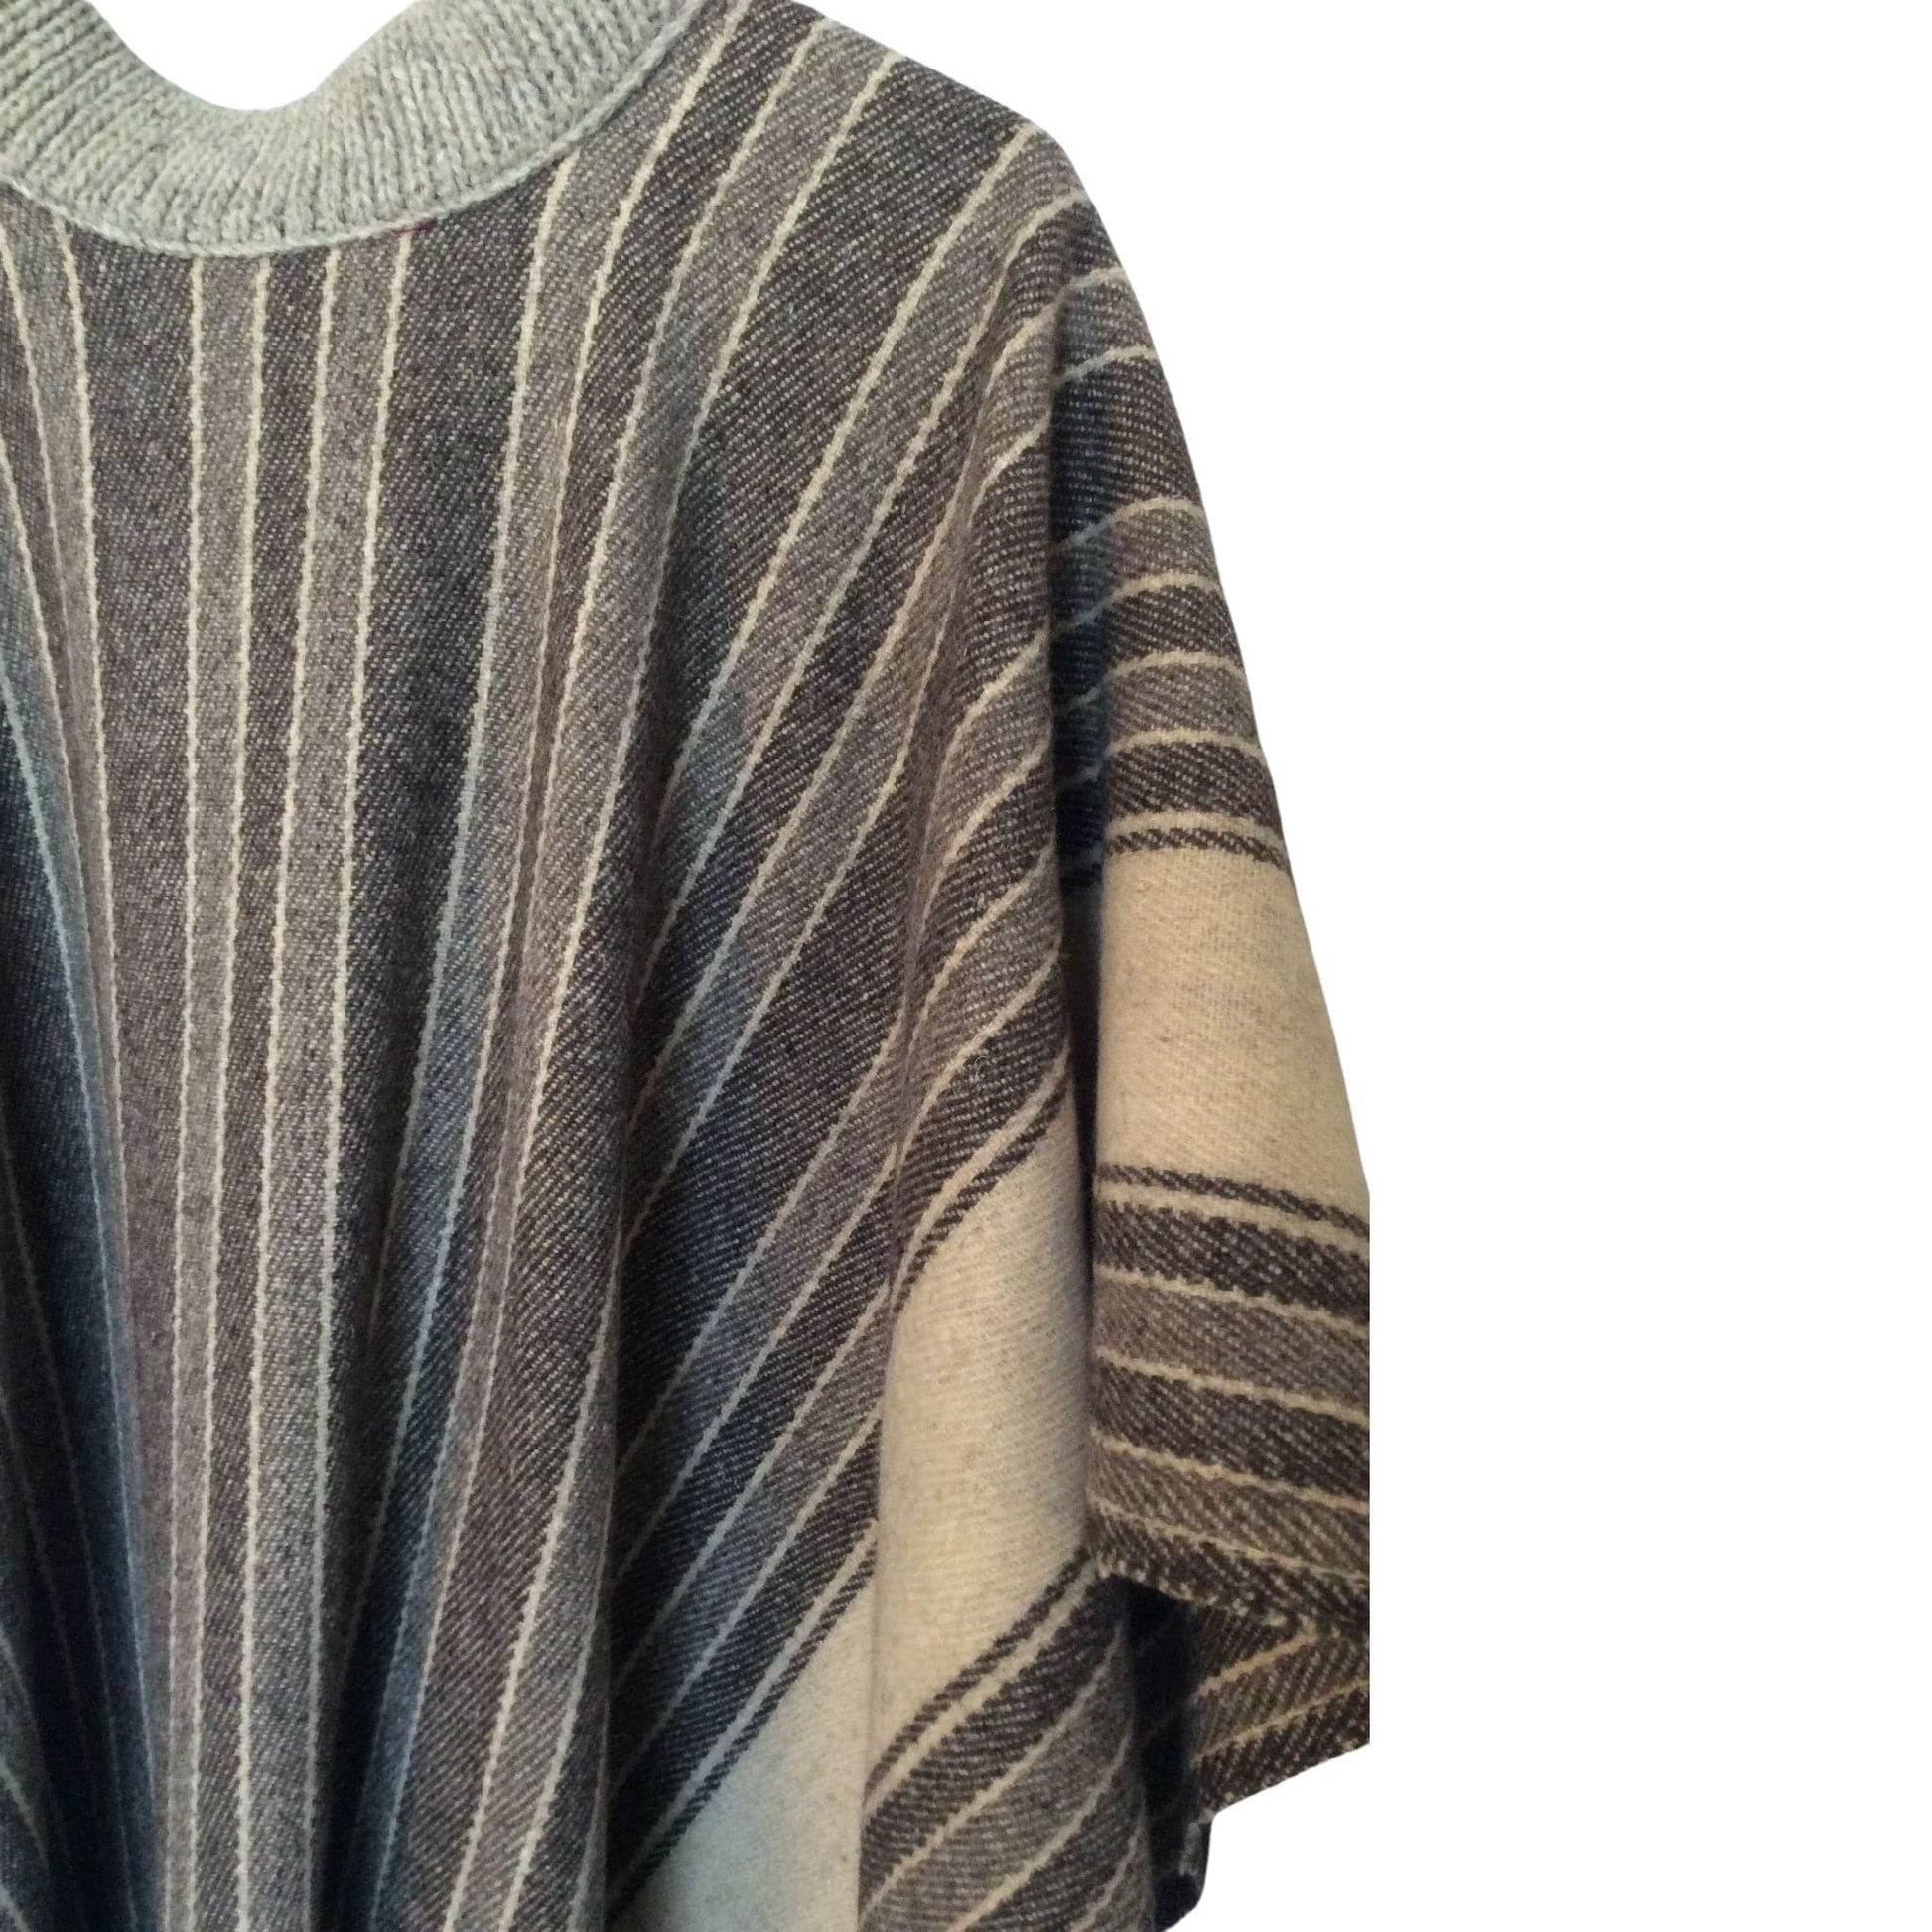 Brown Stripe Wool Poncho One size fits most / Multi / Western